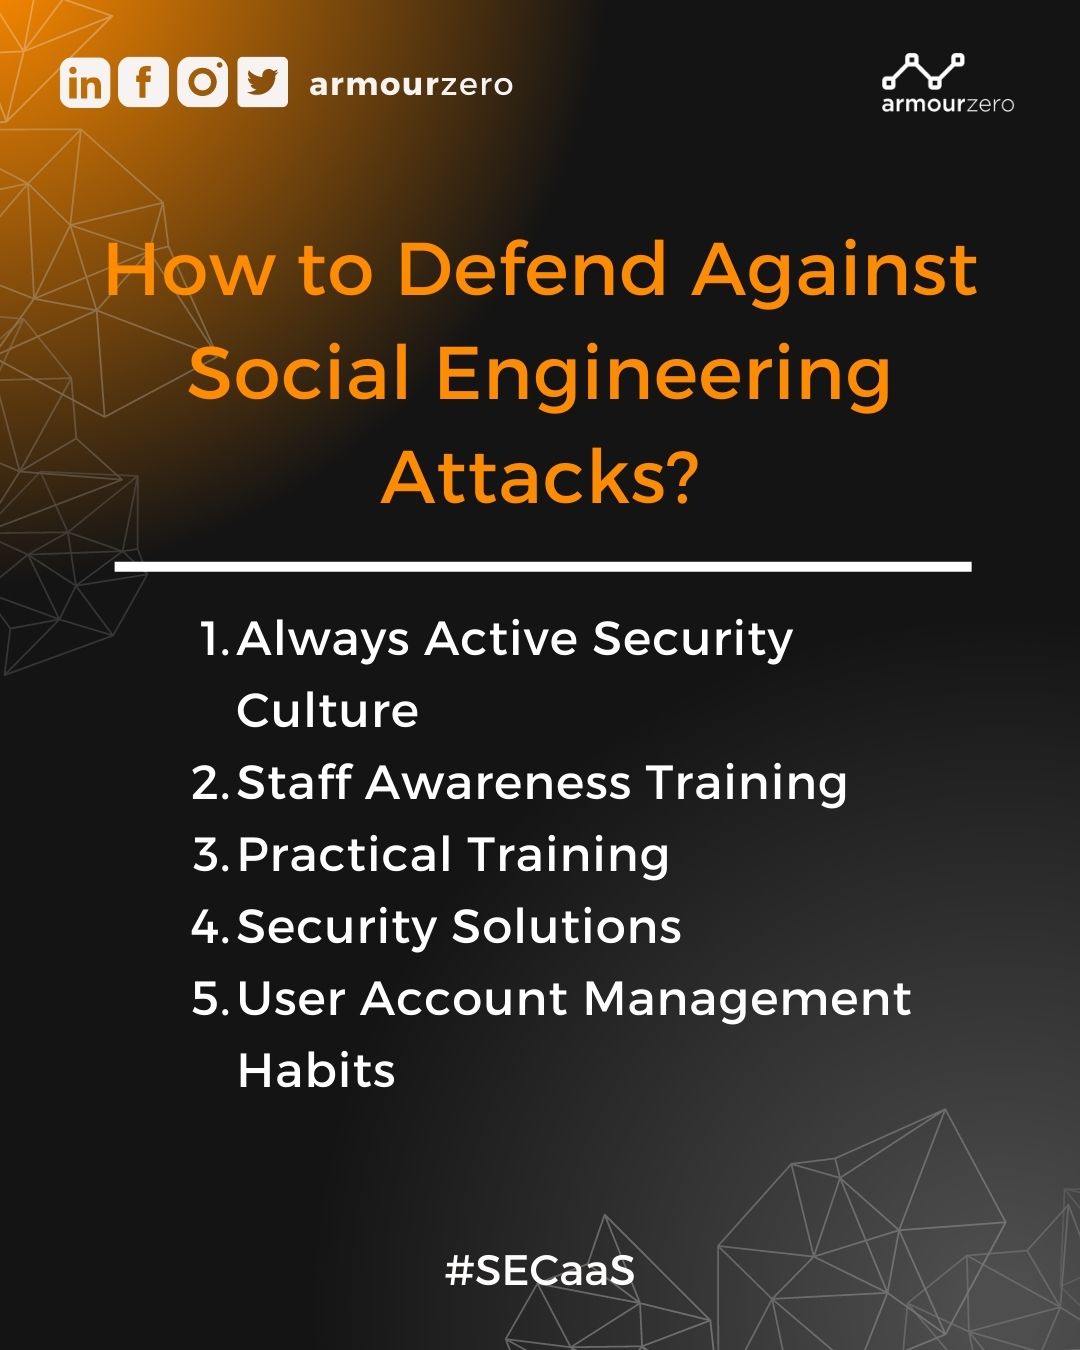 How to defend against social engineering attacks